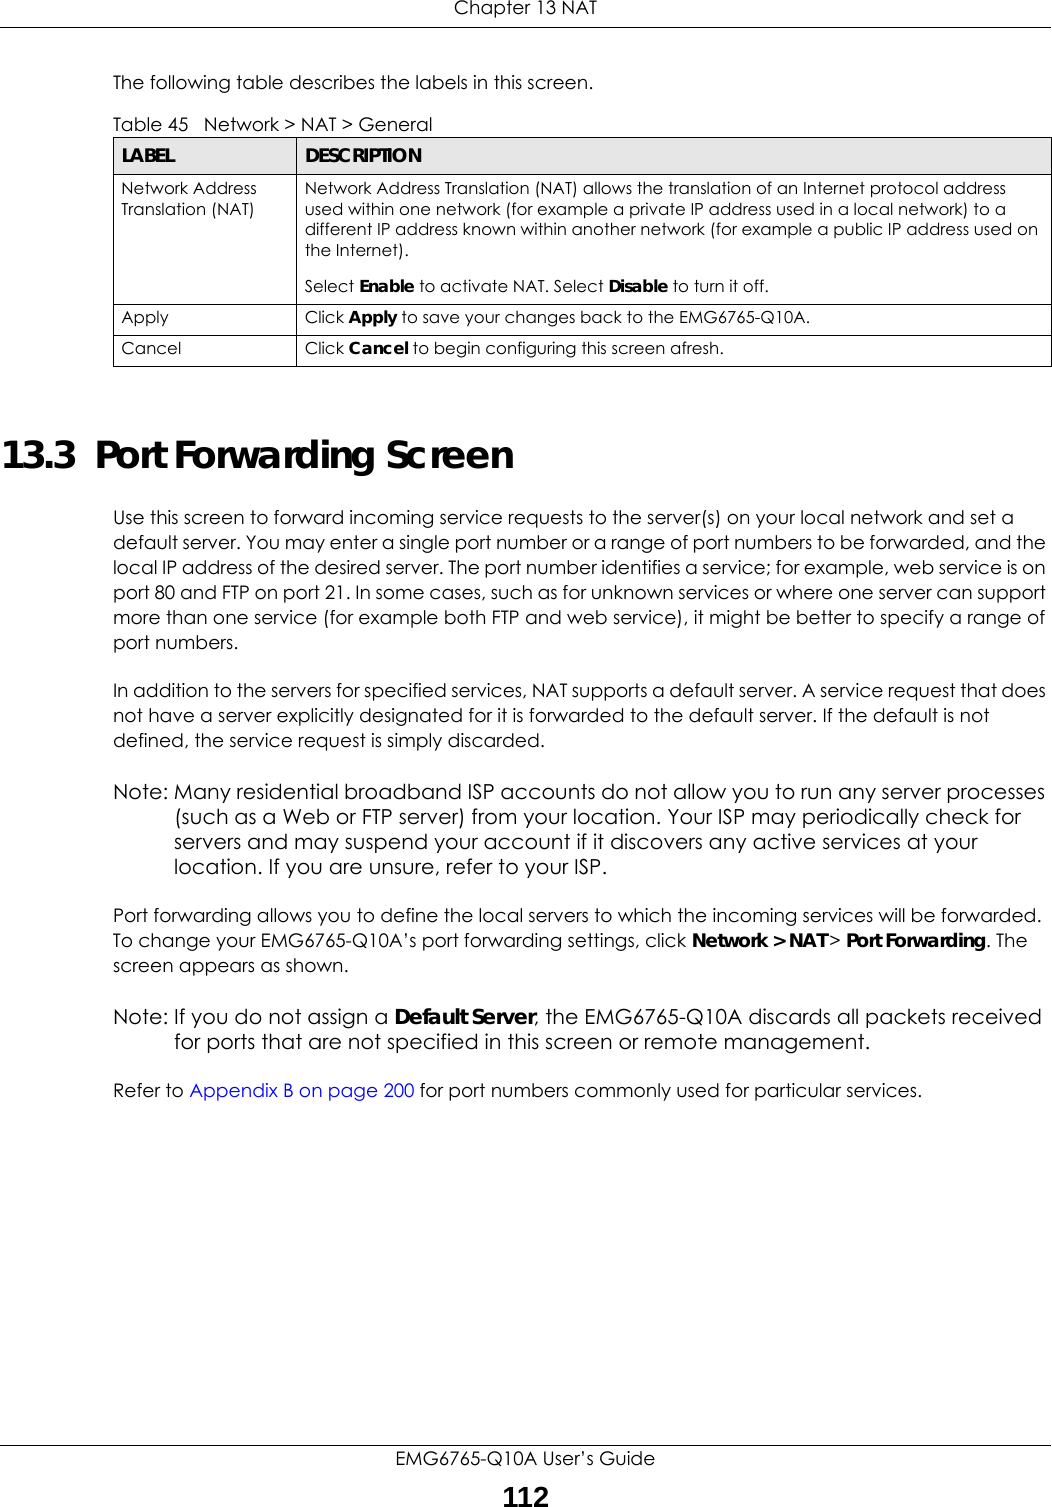 Chapter 13 NATEMG6765-Q10A User’s Guide112The following table describes the labels in this screen.13.3  Port Forwarding Screen   Use this screen to forward incoming service requests to the server(s) on your local network and set a default server. You may enter a single port number or a range of port numbers to be forwarded, and the local IP address of the desired server. The port number identifies a service; for example, web service is on port 80 and FTP on port 21. In some cases, such as for unknown services or where one server can support more than one service (for example both FTP and web service), it might be better to specify a range of port numbers.In addition to the servers for specified services, NAT supports a default server. A service request that does not have a server explicitly designated for it is forwarded to the default server. If the default is not defined, the service request is simply discarded.Note: Many residential broadband ISP accounts do not allow you to run any server processes (such as a Web or FTP server) from your location. Your ISP may periodically check for servers and may suspend your account if it discovers any active services at your location. If you are unsure, refer to your ISP.Port forwarding allows you to define the local servers to which the incoming services will be forwarded. To change your EMG6765-Q10A’s port forwarding settings, click Network &gt; NAT &gt; Port Forwarding. The screen appears as shown.Note: If you do not assign a Default Server, the EMG6765-Q10A discards all packets received for ports that are not specified in this screen or remote management.Refer to Appendix B on page 200 for port numbers commonly used for particular services.Table 45   Network &gt; NAT &gt; GeneralLABEL DESCRIPTIONNetwork Address Translation (NAT)Network Address Translation (NAT) allows the translation of an Internet protocol address used within one network (for example a private IP address used in a local network) to a different IP address known within another network (for example a public IP address used on the Internet). Select Enable to activate NAT. Select Disable to turn it off.Apply Click Apply to save your changes back to the EMG6765-Q10A.Cancel Click Cancel to begin configuring this screen afresh.